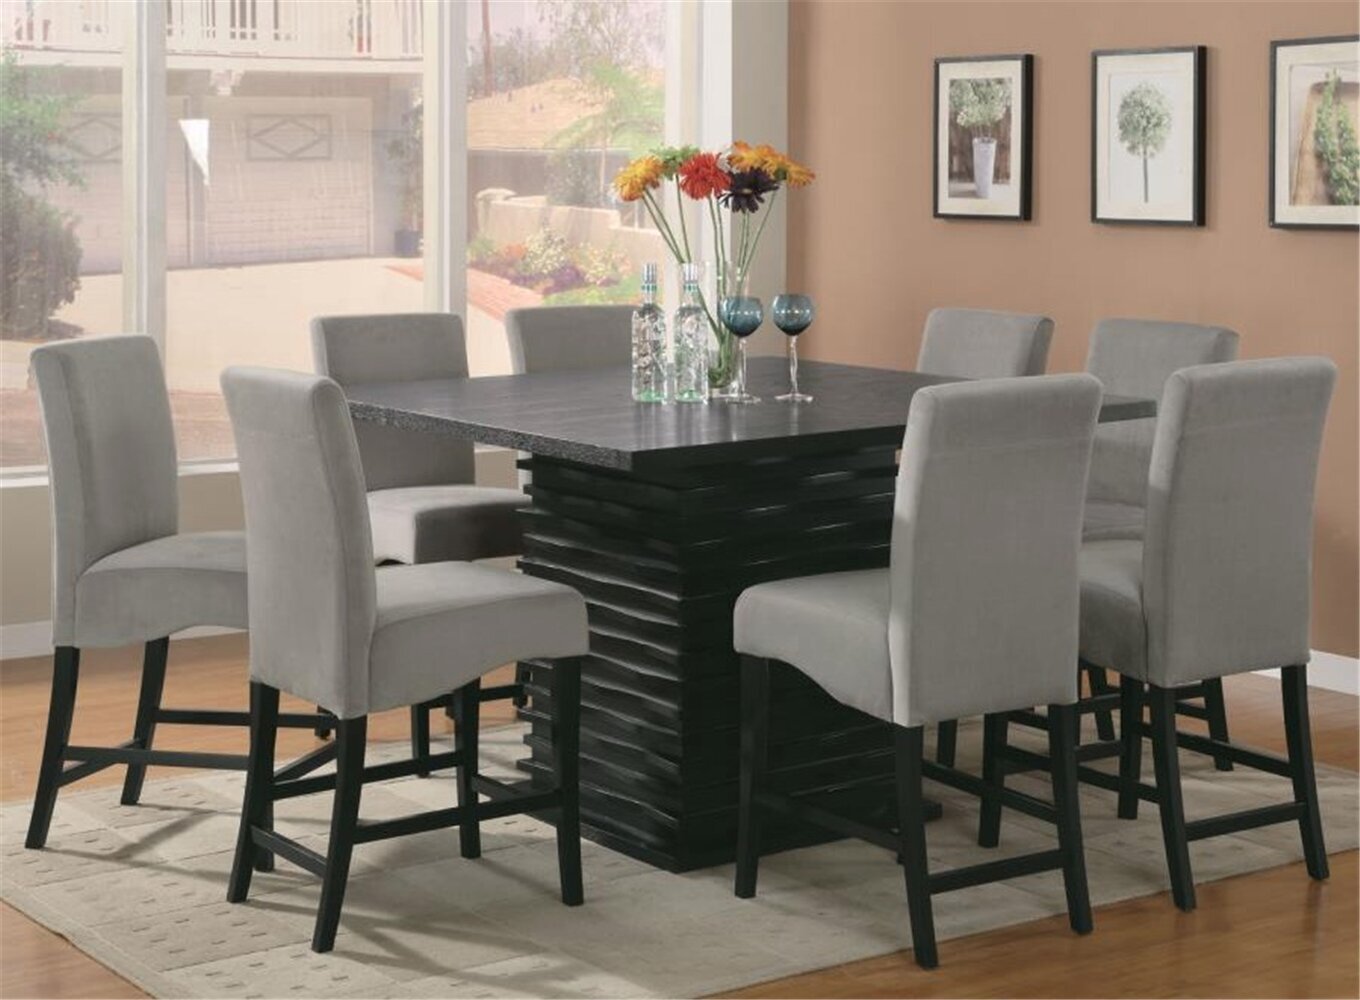 Contemporary bar height dining table for 8